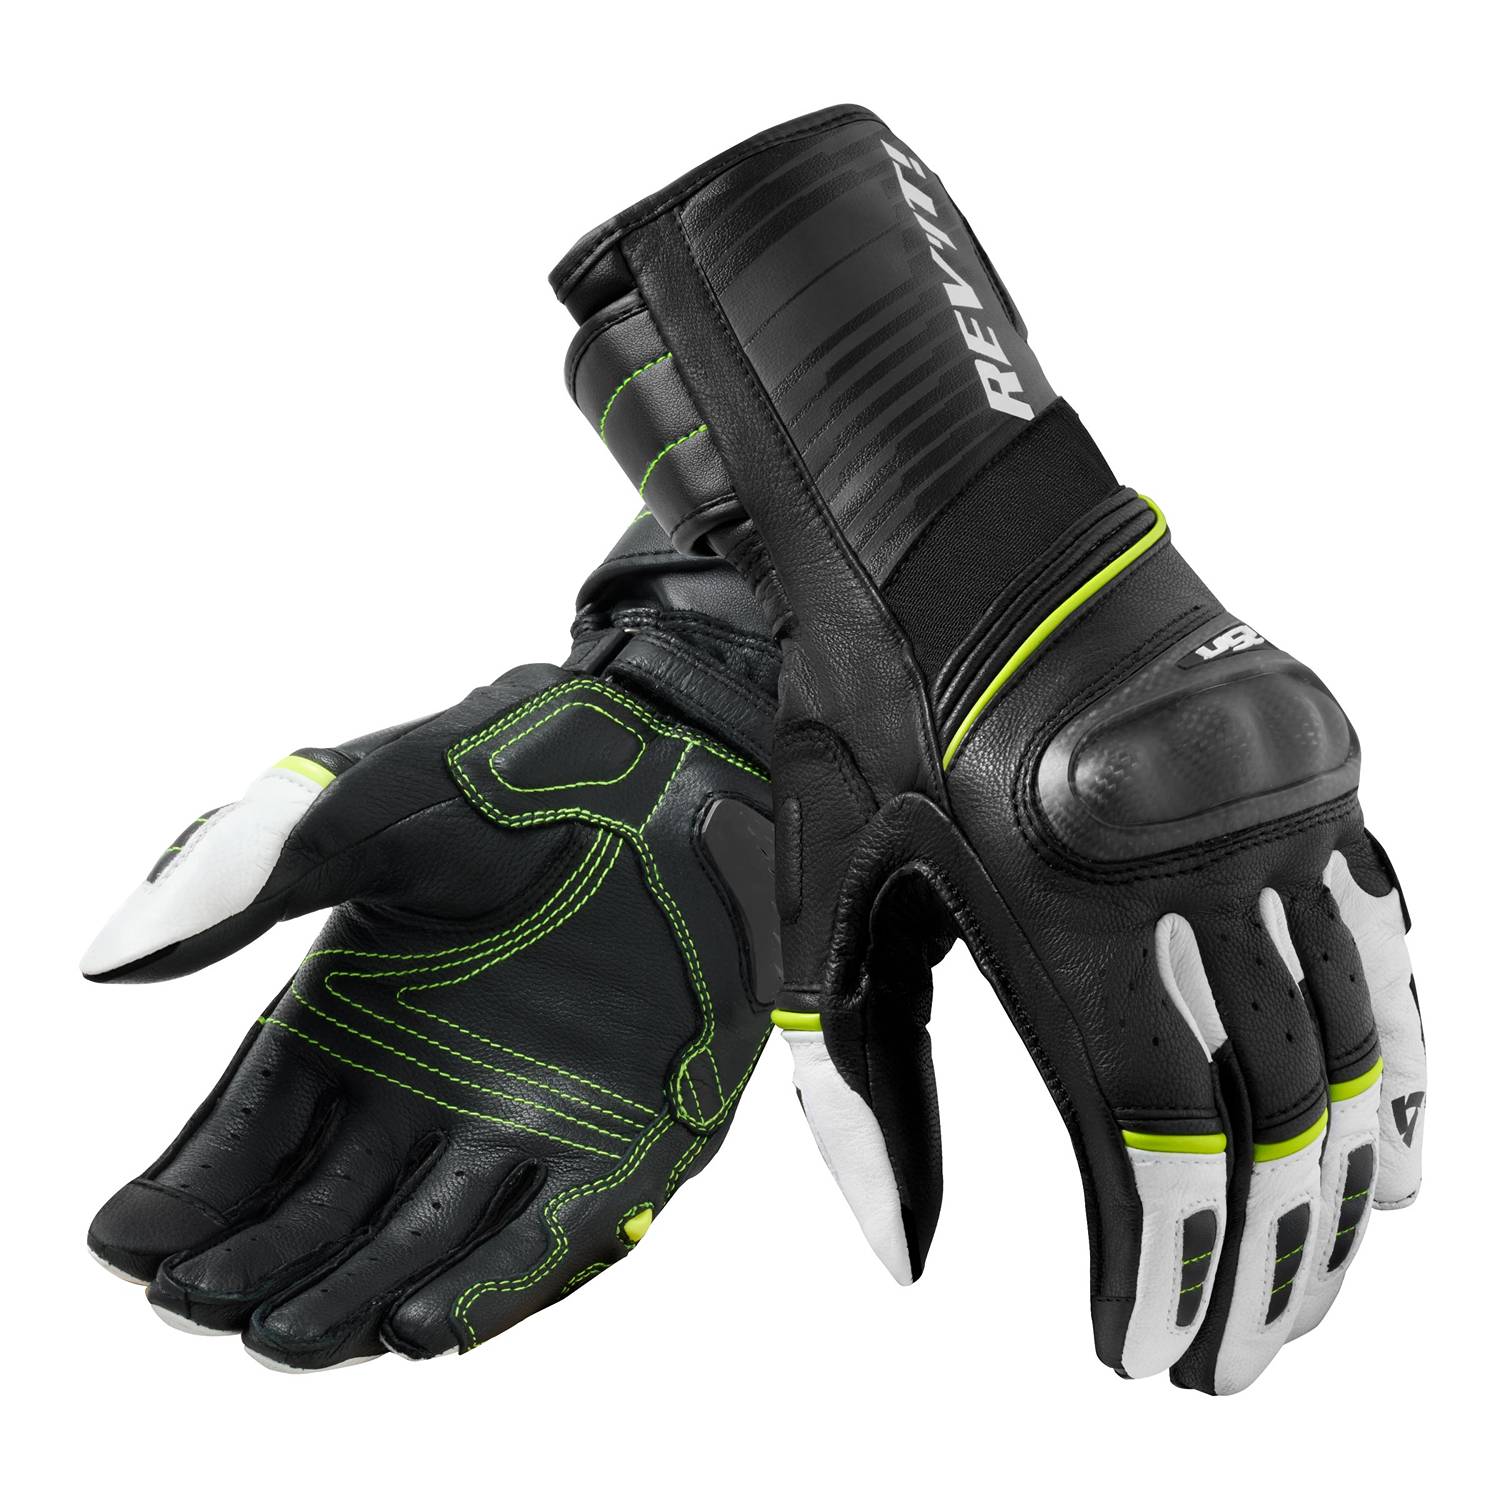 Image of REV'IT! RSR 4 Black Gloves Neon Yellow Size 2XL ID 8700001306836